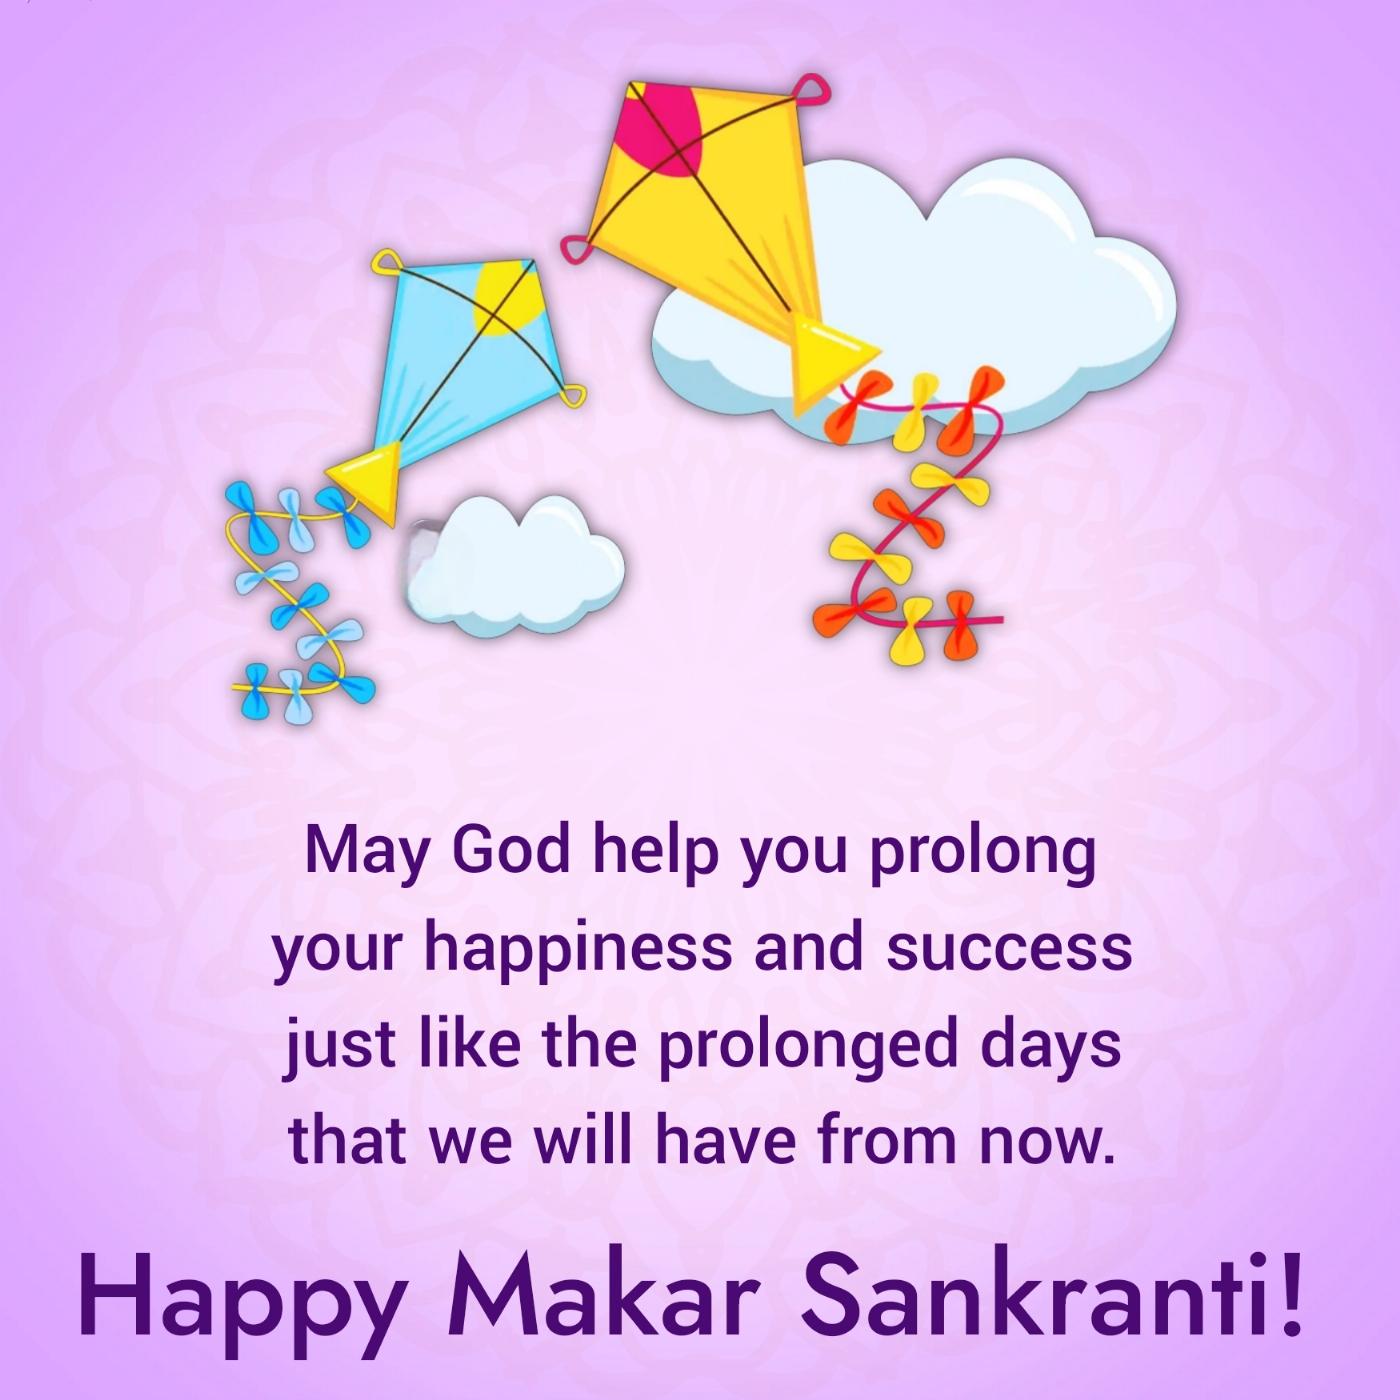 May God help you prolong your happiness and success